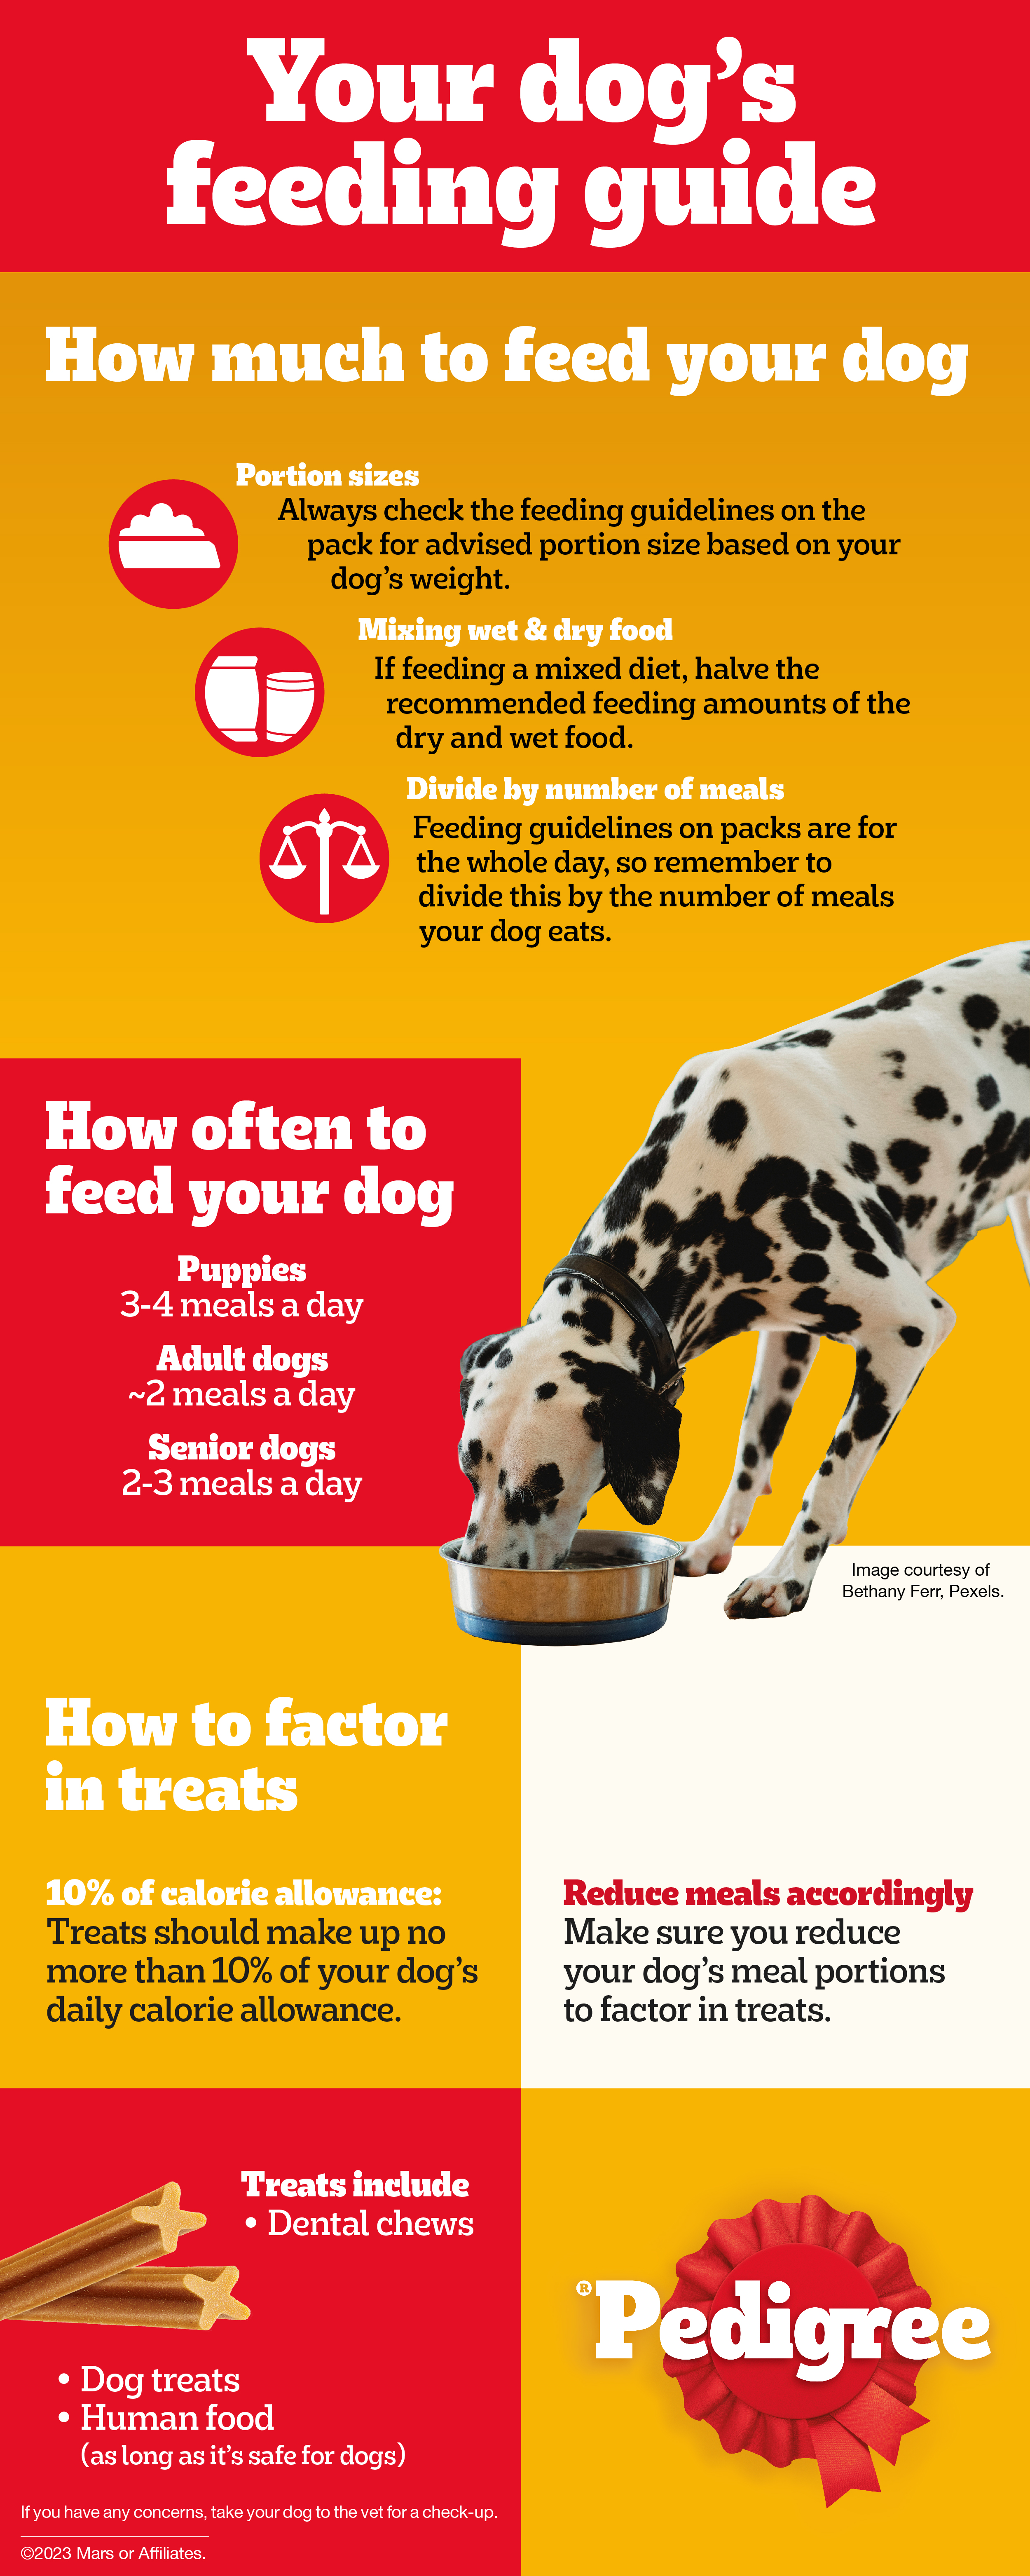 How Heavy Should Your Dog Be?